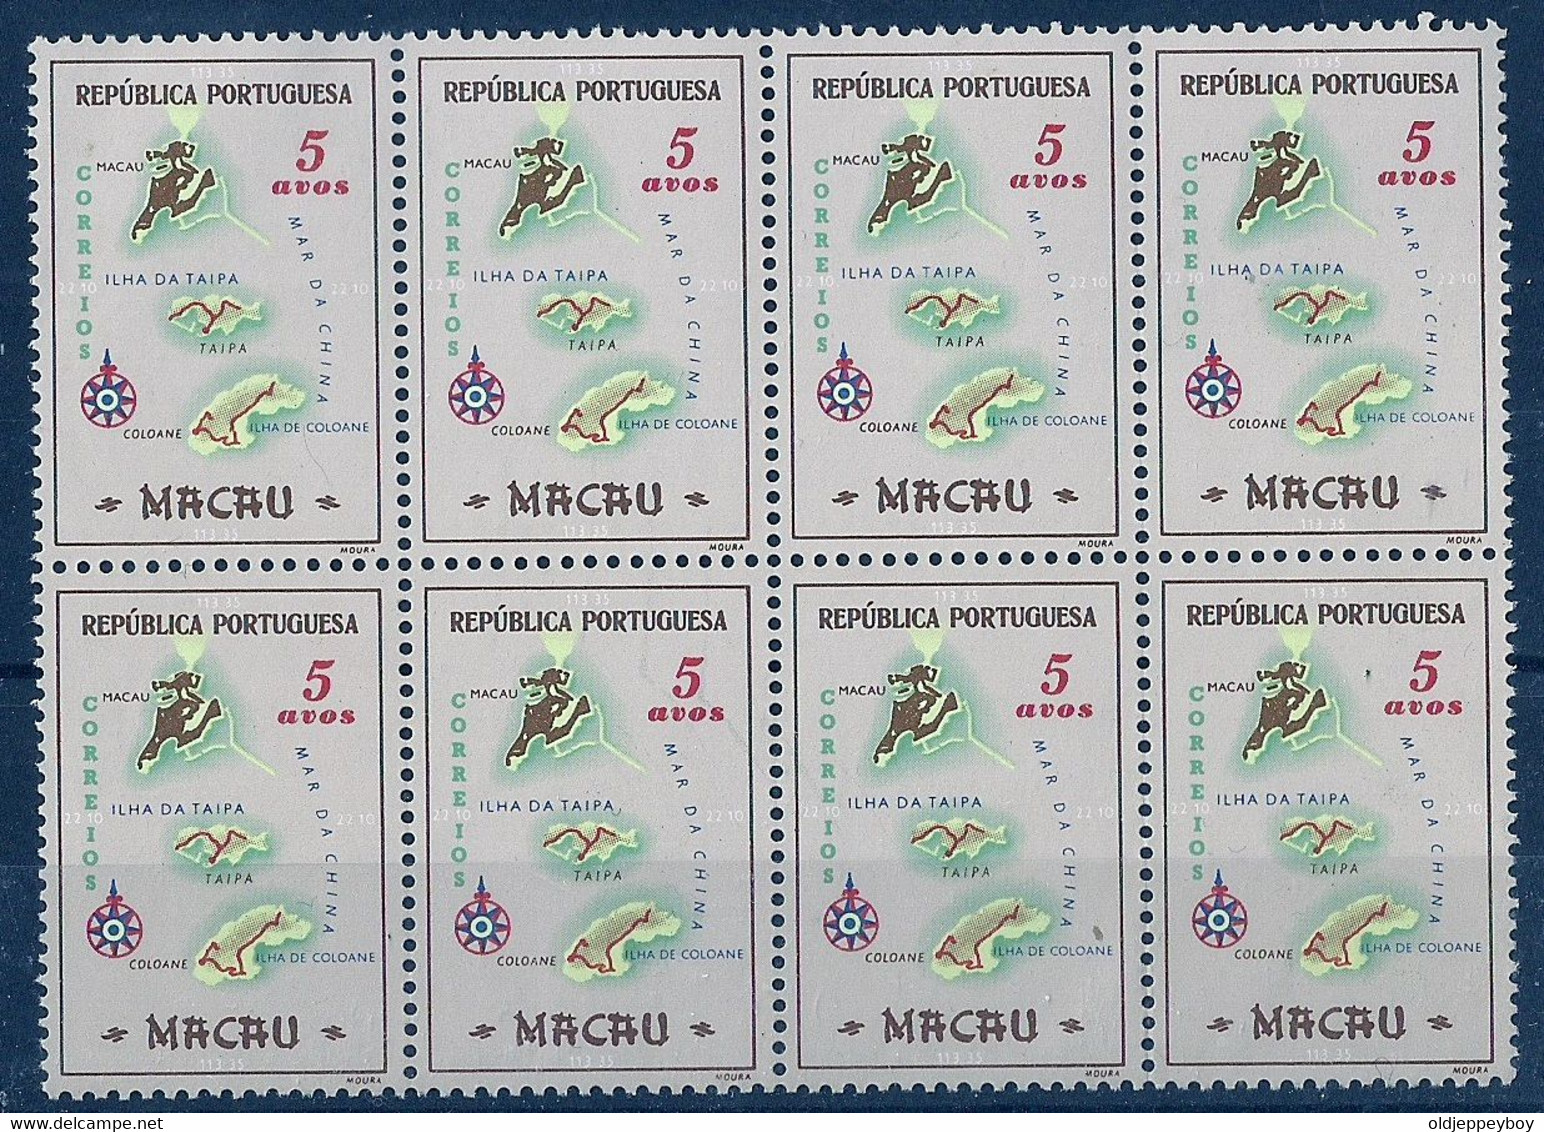 Chine China MACAO MACAU Portugal  1956 Geographic Map 5 AVOS Block Of 8 MNH Mundifill 388 Extra Fine - Hojas Bloque